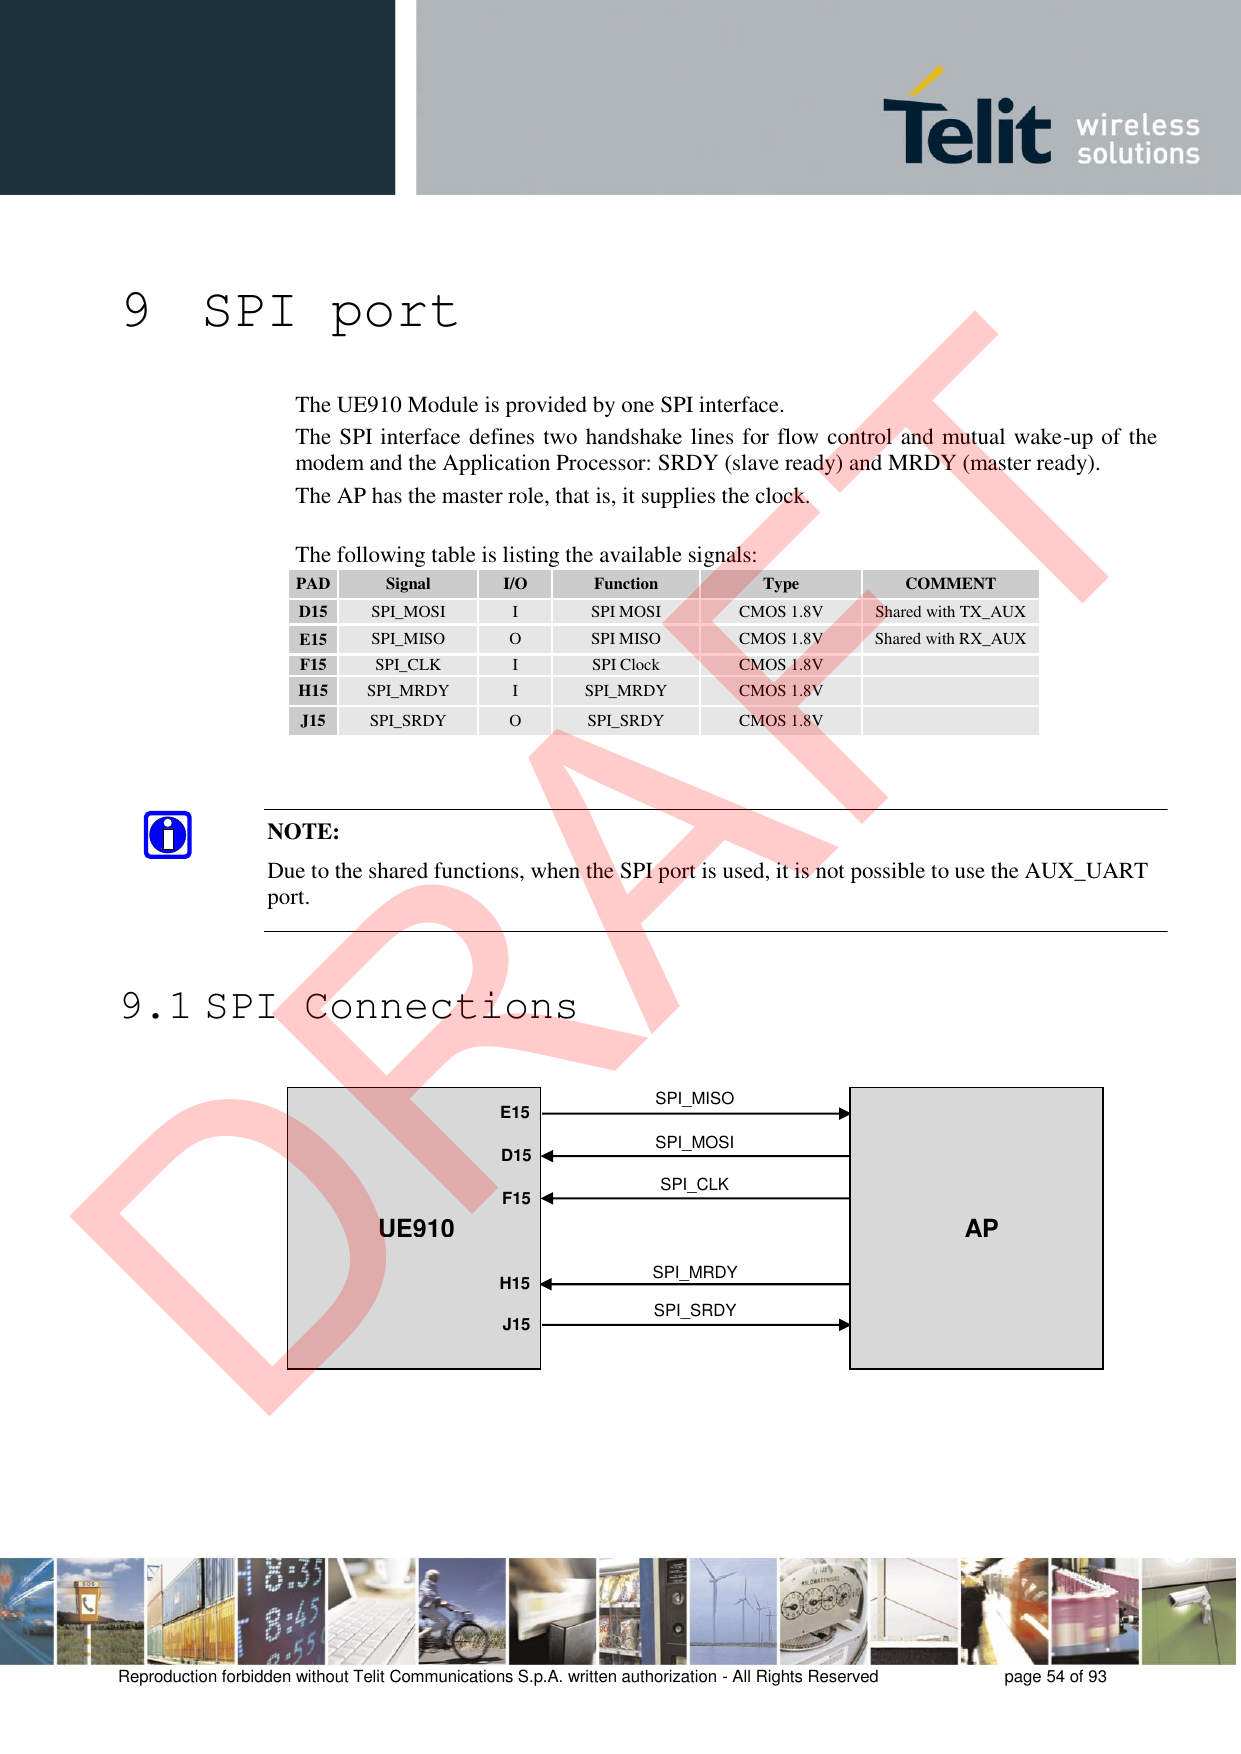 Reproduction forbidden without Telit Communications S.p.A. written authorization - All Rights Reserved  page 54 of 93 9 SPI port The UE910 Module is provided by one SPI interface. The SPI interface defines two handshake lines for flow control and mutual wake-up of the modem and the Application Processor: SRDY (slave ready) and MRDY (master ready). The AP has the master role, that is, it supplies the clock. The following table is listing the available signals: PAD Signal I/O Function Type COMMENT D15 SPI_MOSI I SPI MOSI CMOS 1.8V Shared with TX_AUX E15 SPI_MISO O SPI MISO CMOS 1.8V Shared with RX_AUX F15 SPI_CLK I SPI Clock CMOS 1.8V H15 SPI_MRDY I SPI_MRDY CMOS 1.8V J15 SPI_SRDY O SPI_SRDY CMOS 1.8V 9.1 SPI Connections NOTE: Due to the shared functions, when the SPI port is used, it is not possible to use the AUX_UART port. SPI_MISOSPI_MOSISPI_CLKSPI_MRDYSPI_SRDYE15D15F15H15J15UE910APDRAFT